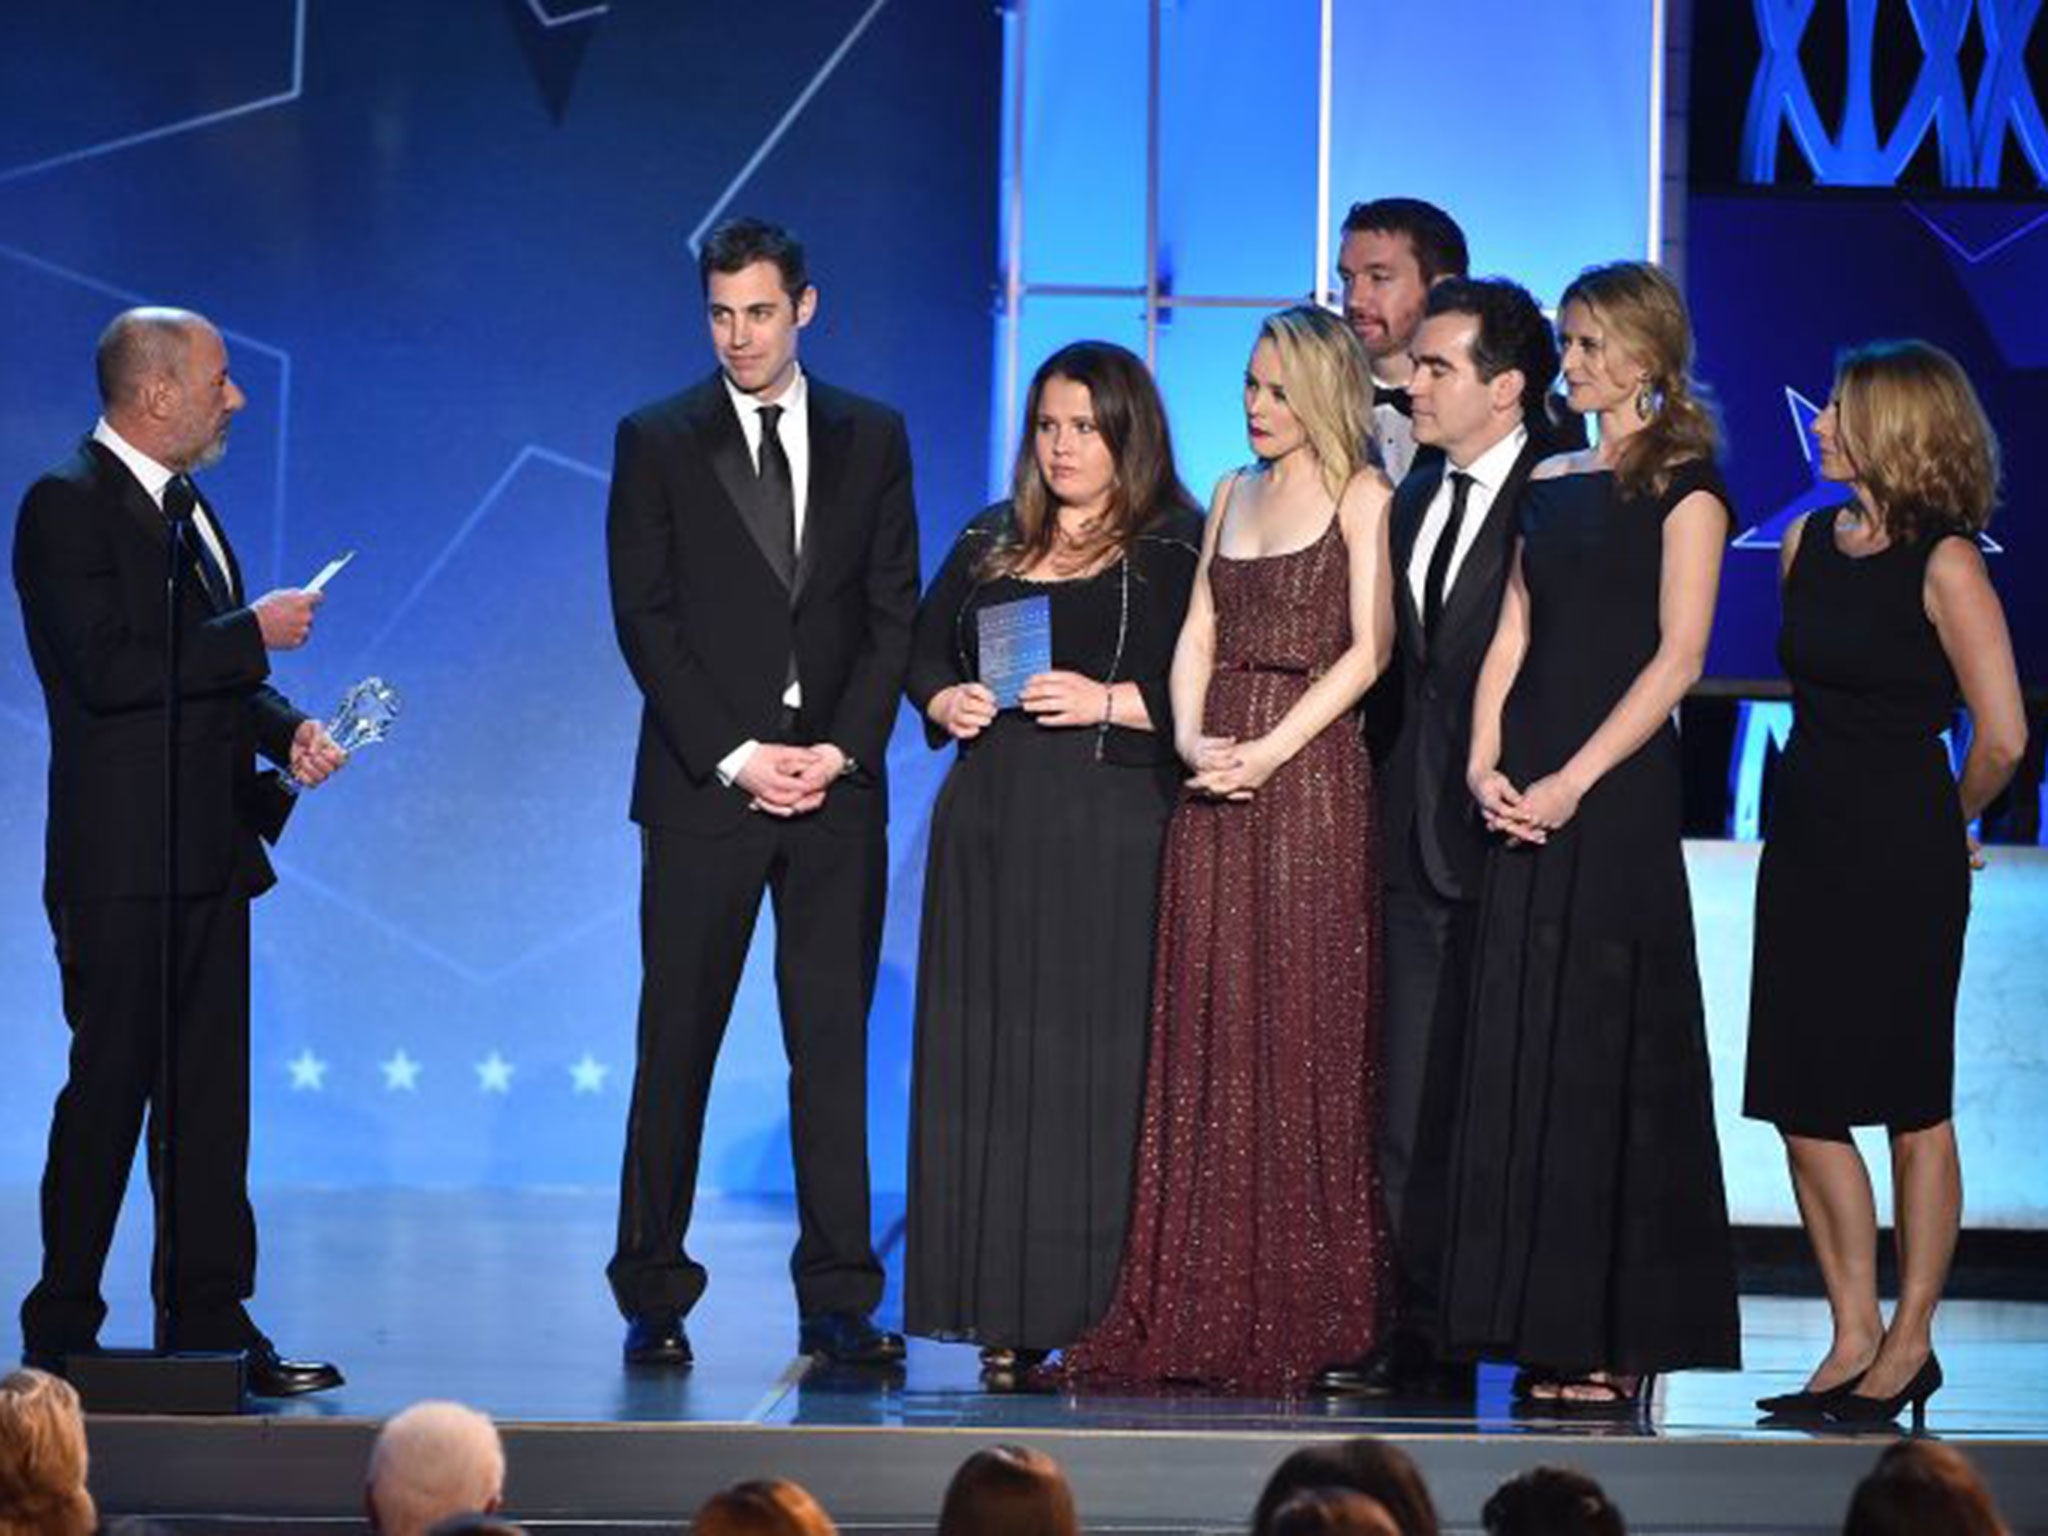 Making the cut: film producer Steve Golin and others who worked on ‘Spotlight’ accepted the Best Picture award for at the 21st Annual Critics’ Choice Awards in January